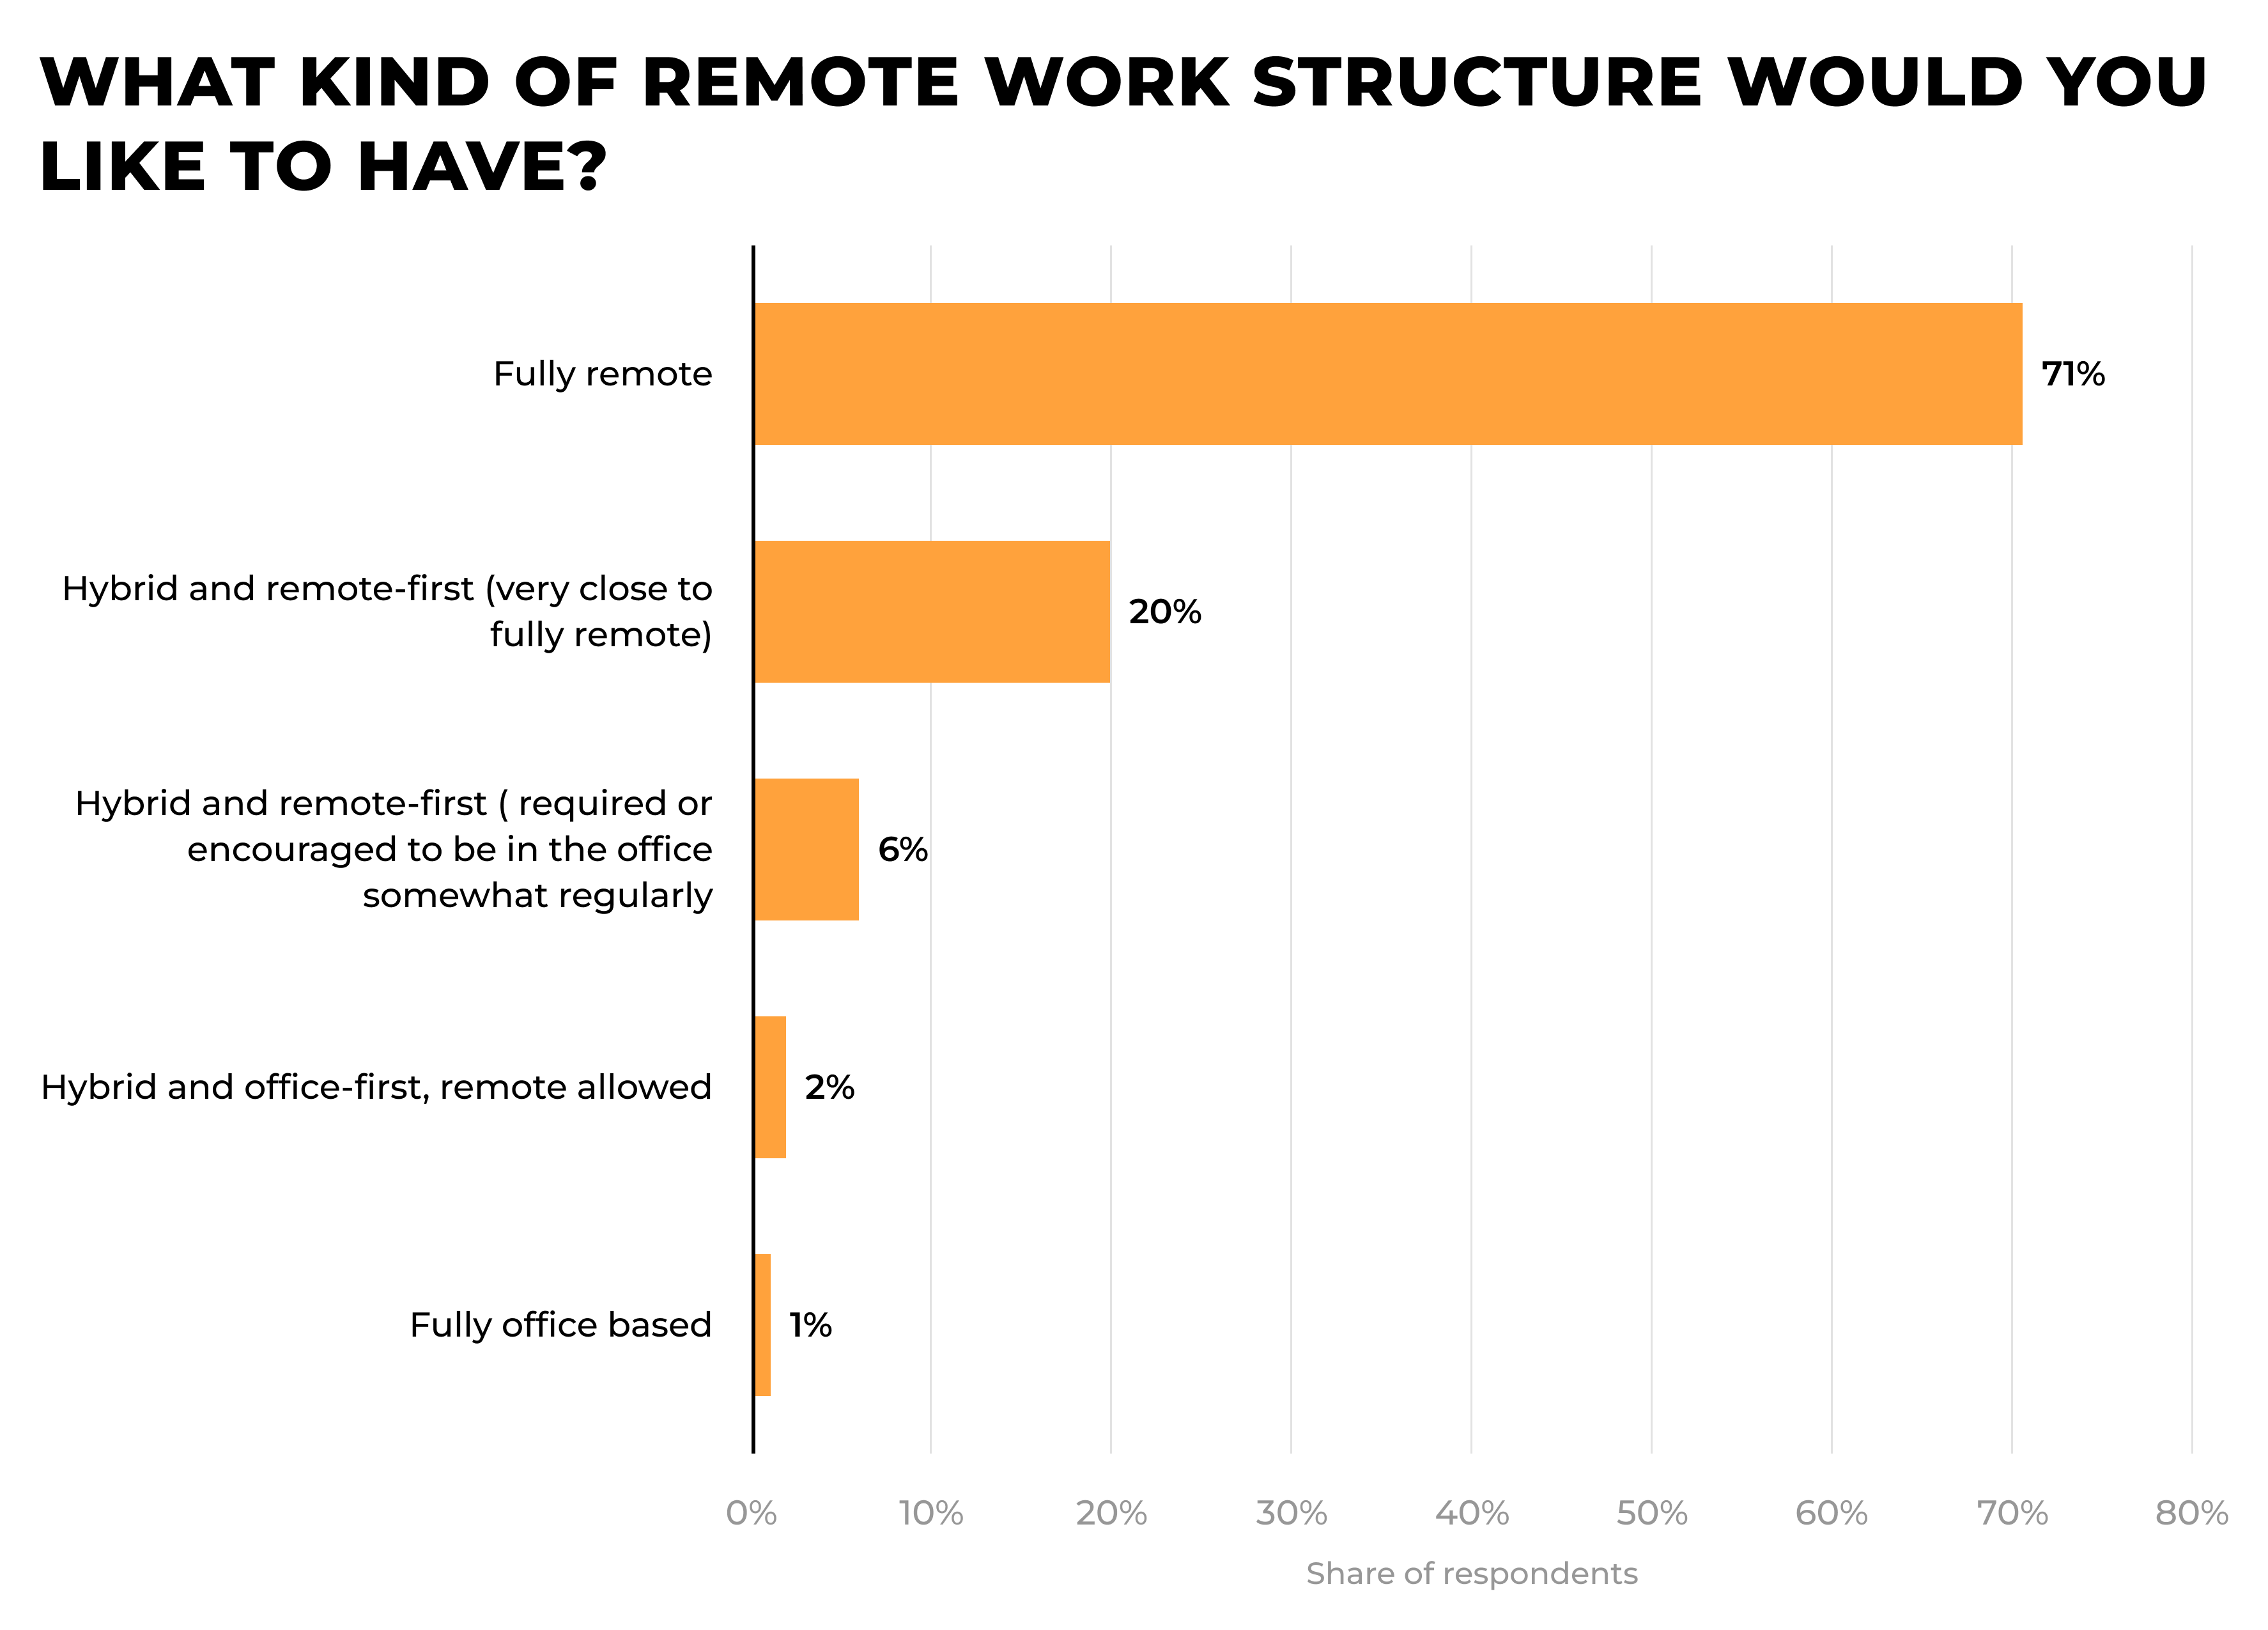 What kind of remote work structure would you like to have?